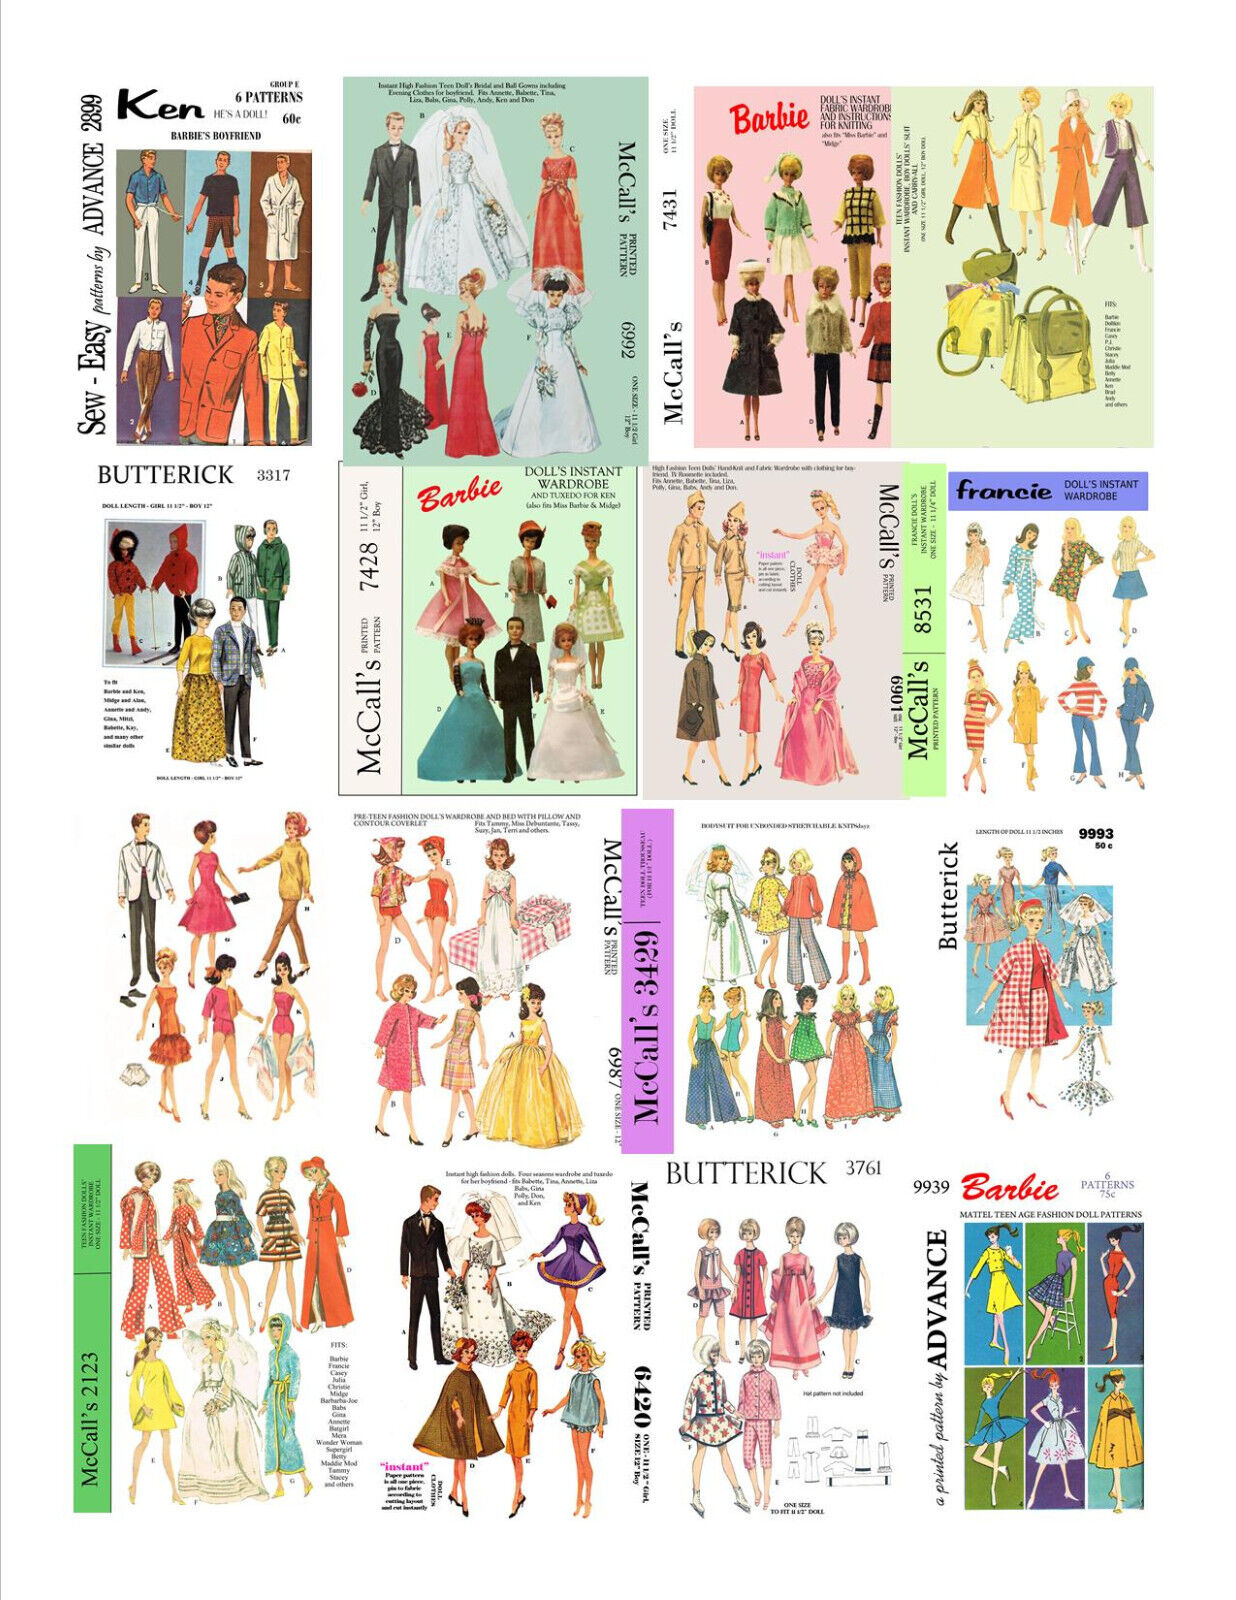 264 (approx) sewing patterns for barbie, skipper and other fashion dolls on CD